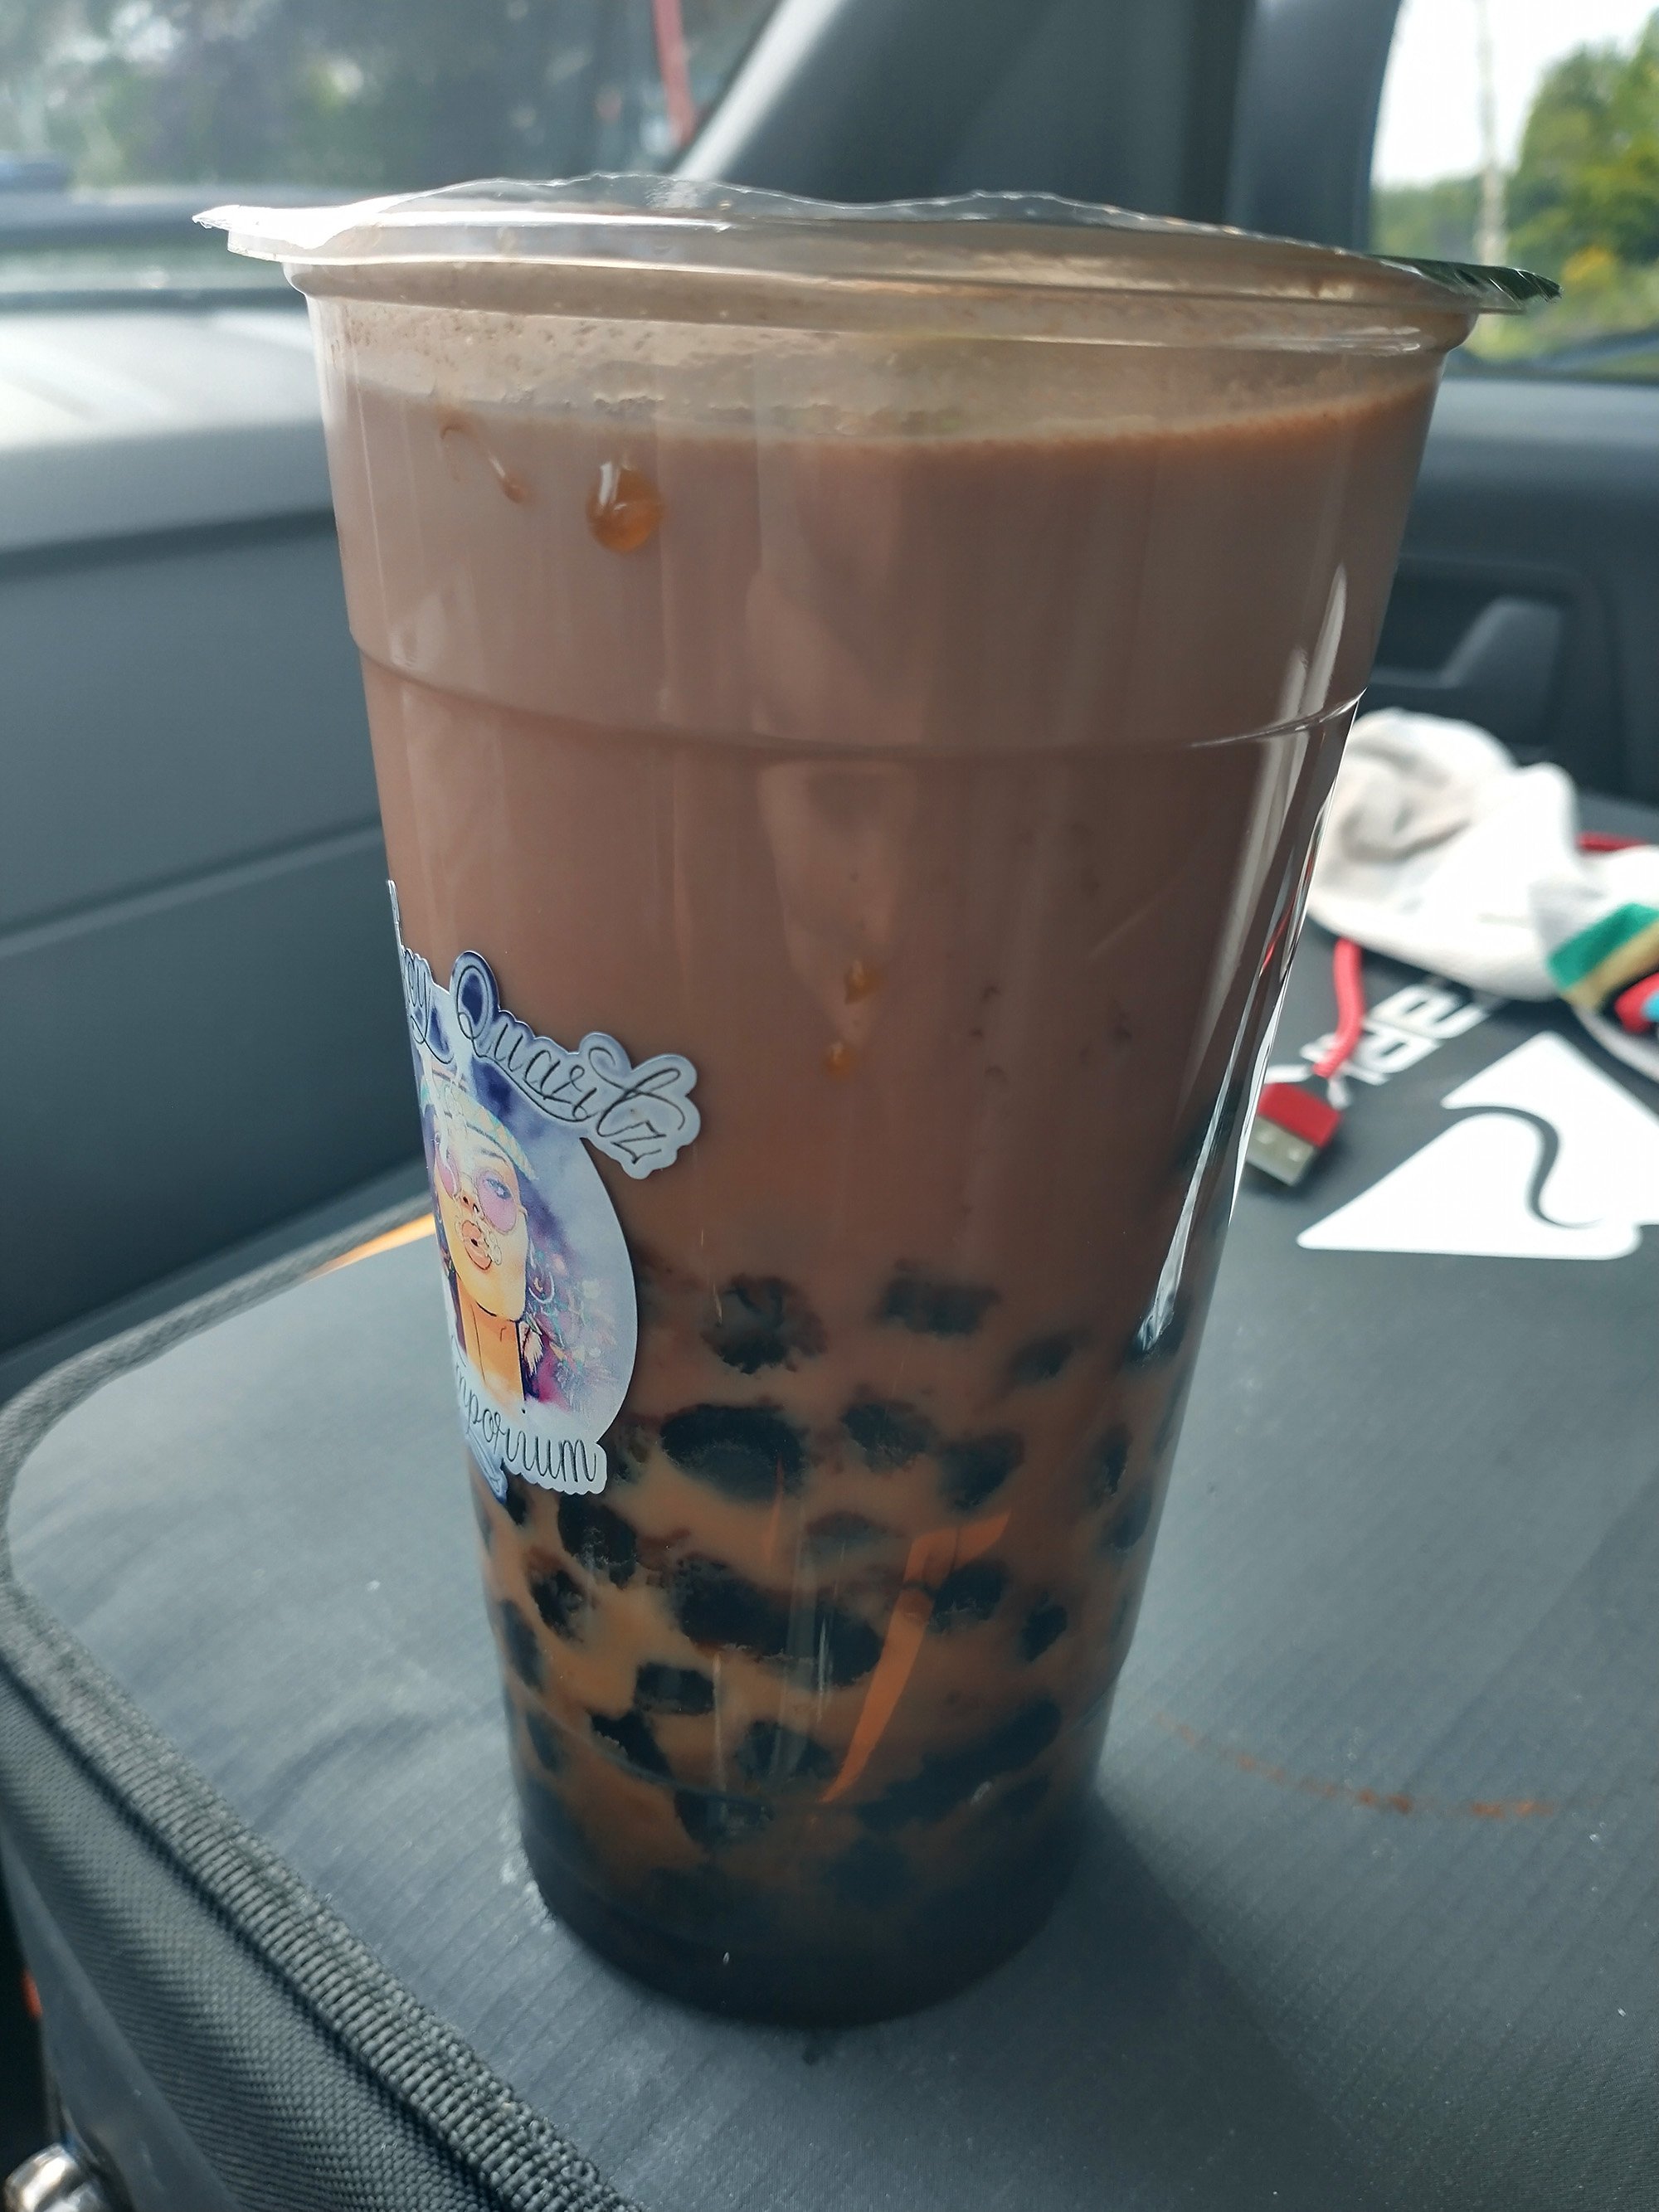 Treated myself to a bubble tea with 5x the beads. Ride was a game of trying to finish it without stopping for water just so I could get my bubble tea faster...